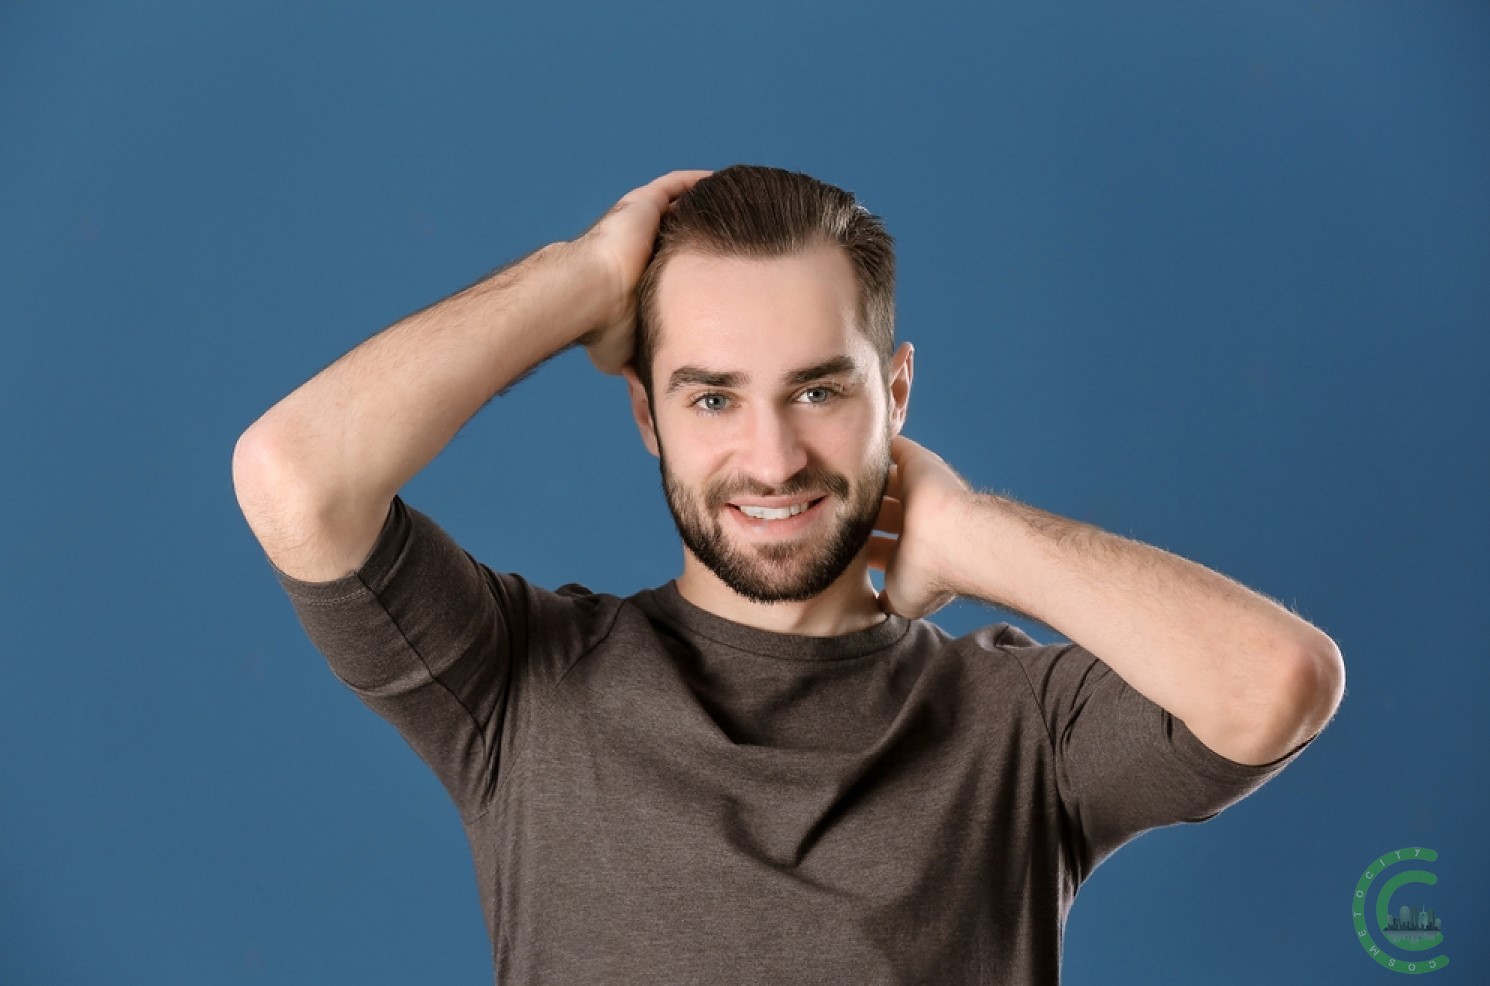 The Pros and Cons of Hair Transplantation